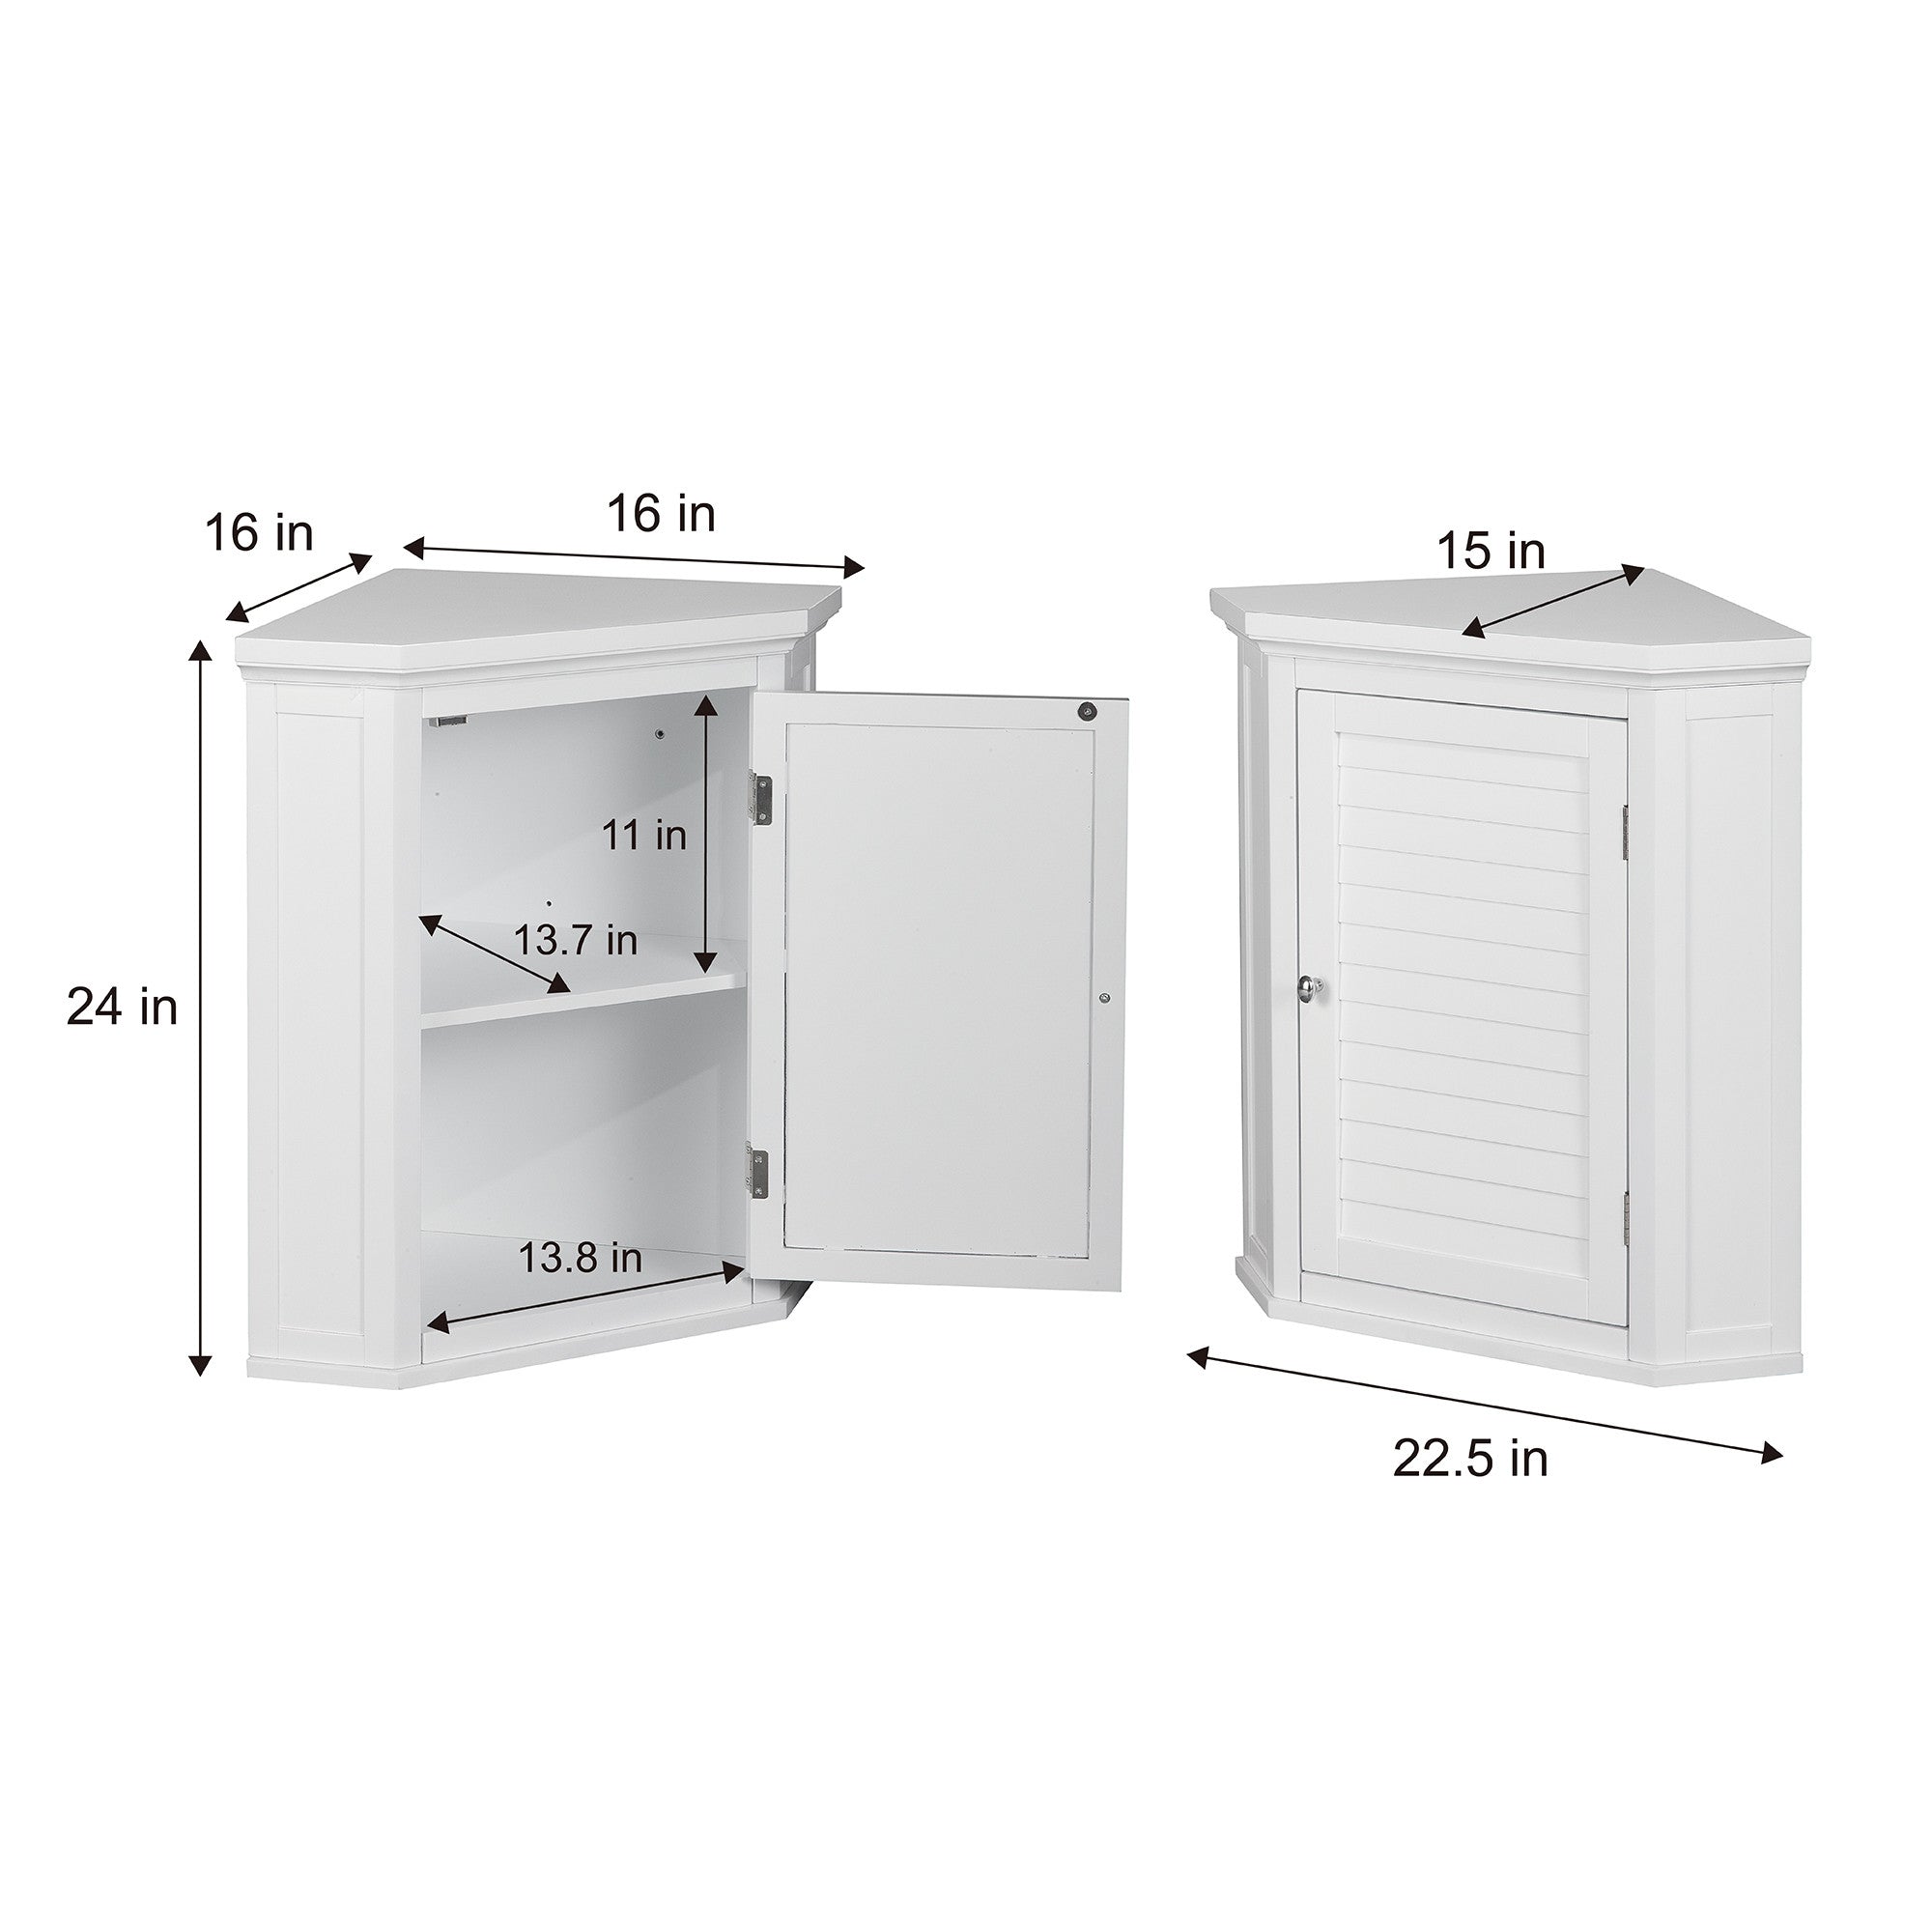 Elegant Home Fashions Glancy One Shutter Door Removable Wooden Corner Wall Cabinet White